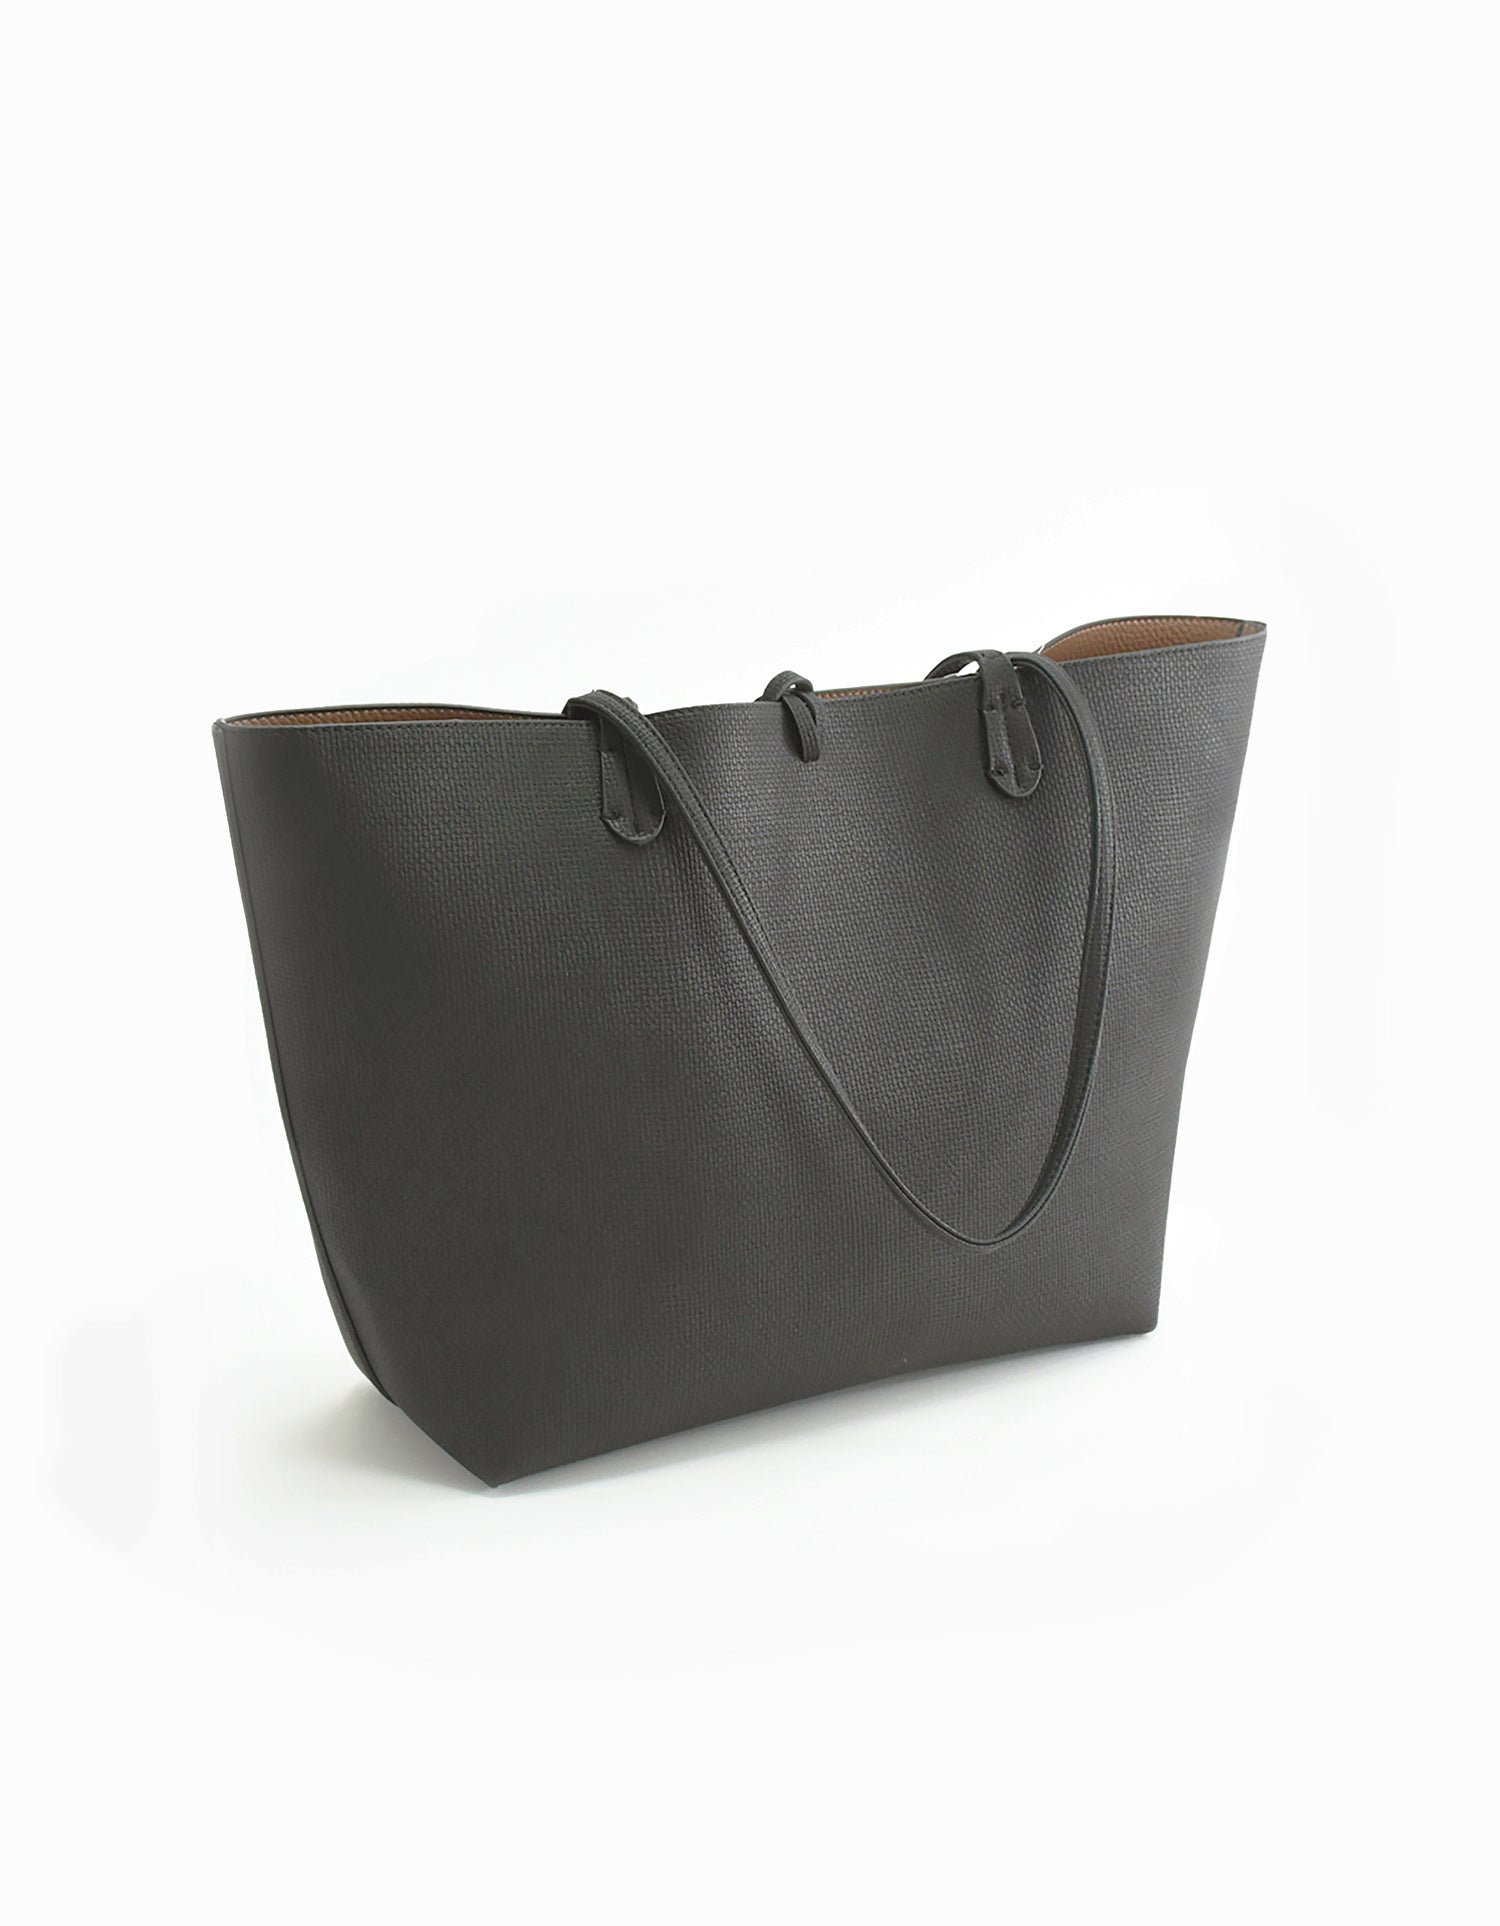 DEPARTURE TOTE GREY/TAUPE